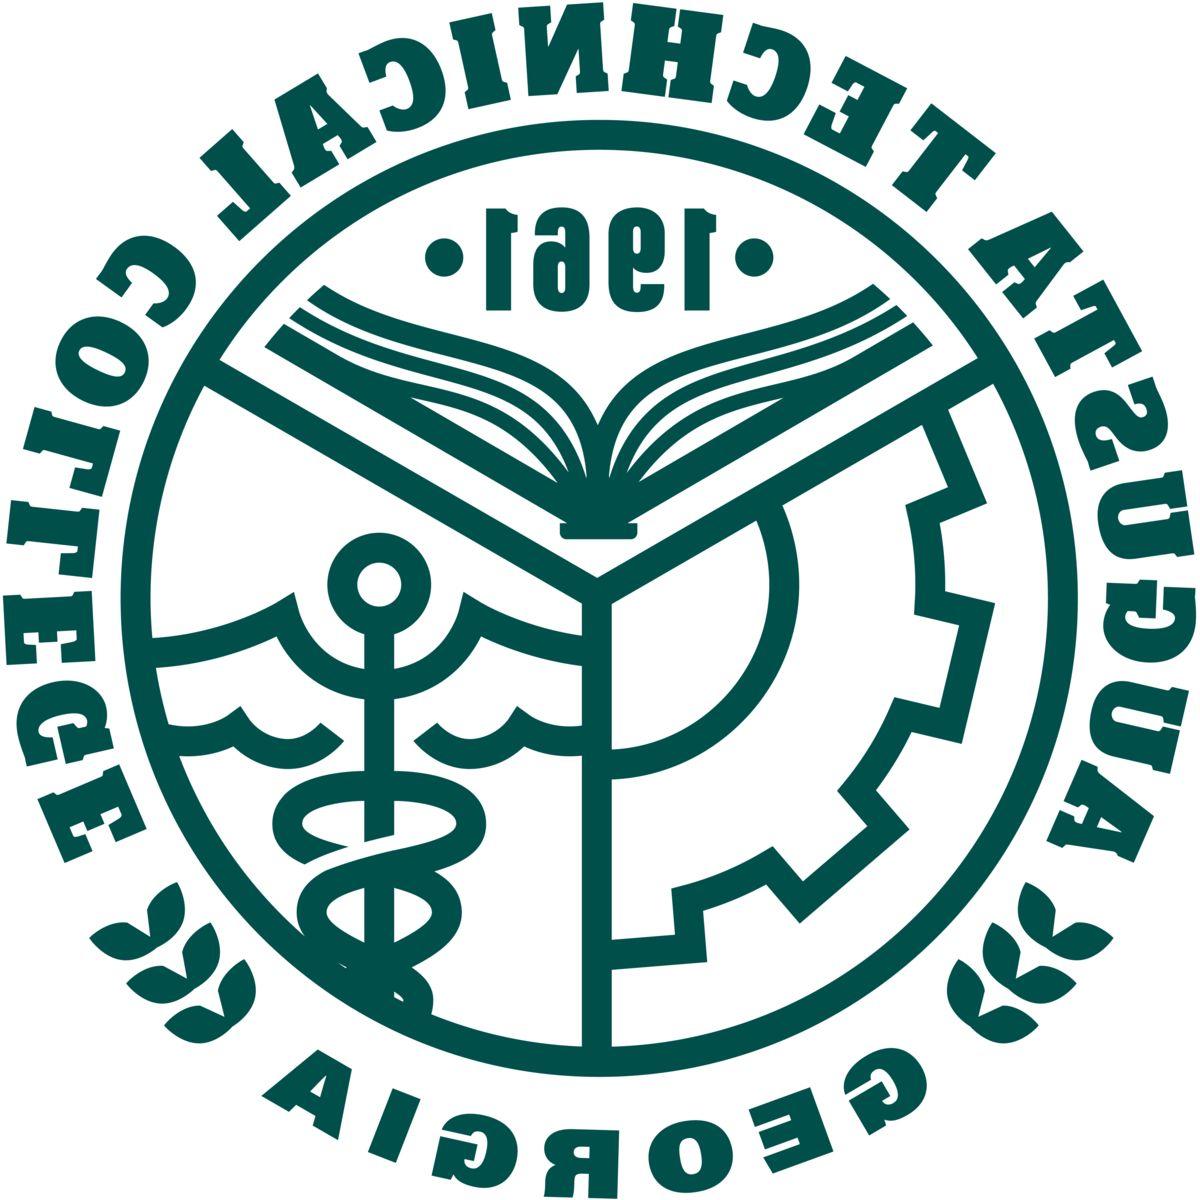 Augusta Technical College seal in Heritage Green composed of the words Augusta Technical College circling the top 3/4s of a circular outline. The word Georgia is centered at the bottom outside the circular outline, separated from the words Augusta and College by three stylized laurel leaves. The inner part of the circular outline is divided into three sections by lines forming a capitalzed Y. The upper section includes the image of an open book as seen from the bottom edge with the year 1961 above it framed by two small diamonds. The bottom left section contains an outline of a gear with the hollow center of the gear opening to the center of the Y. The bottom right section contains the outline of a caduceus. 